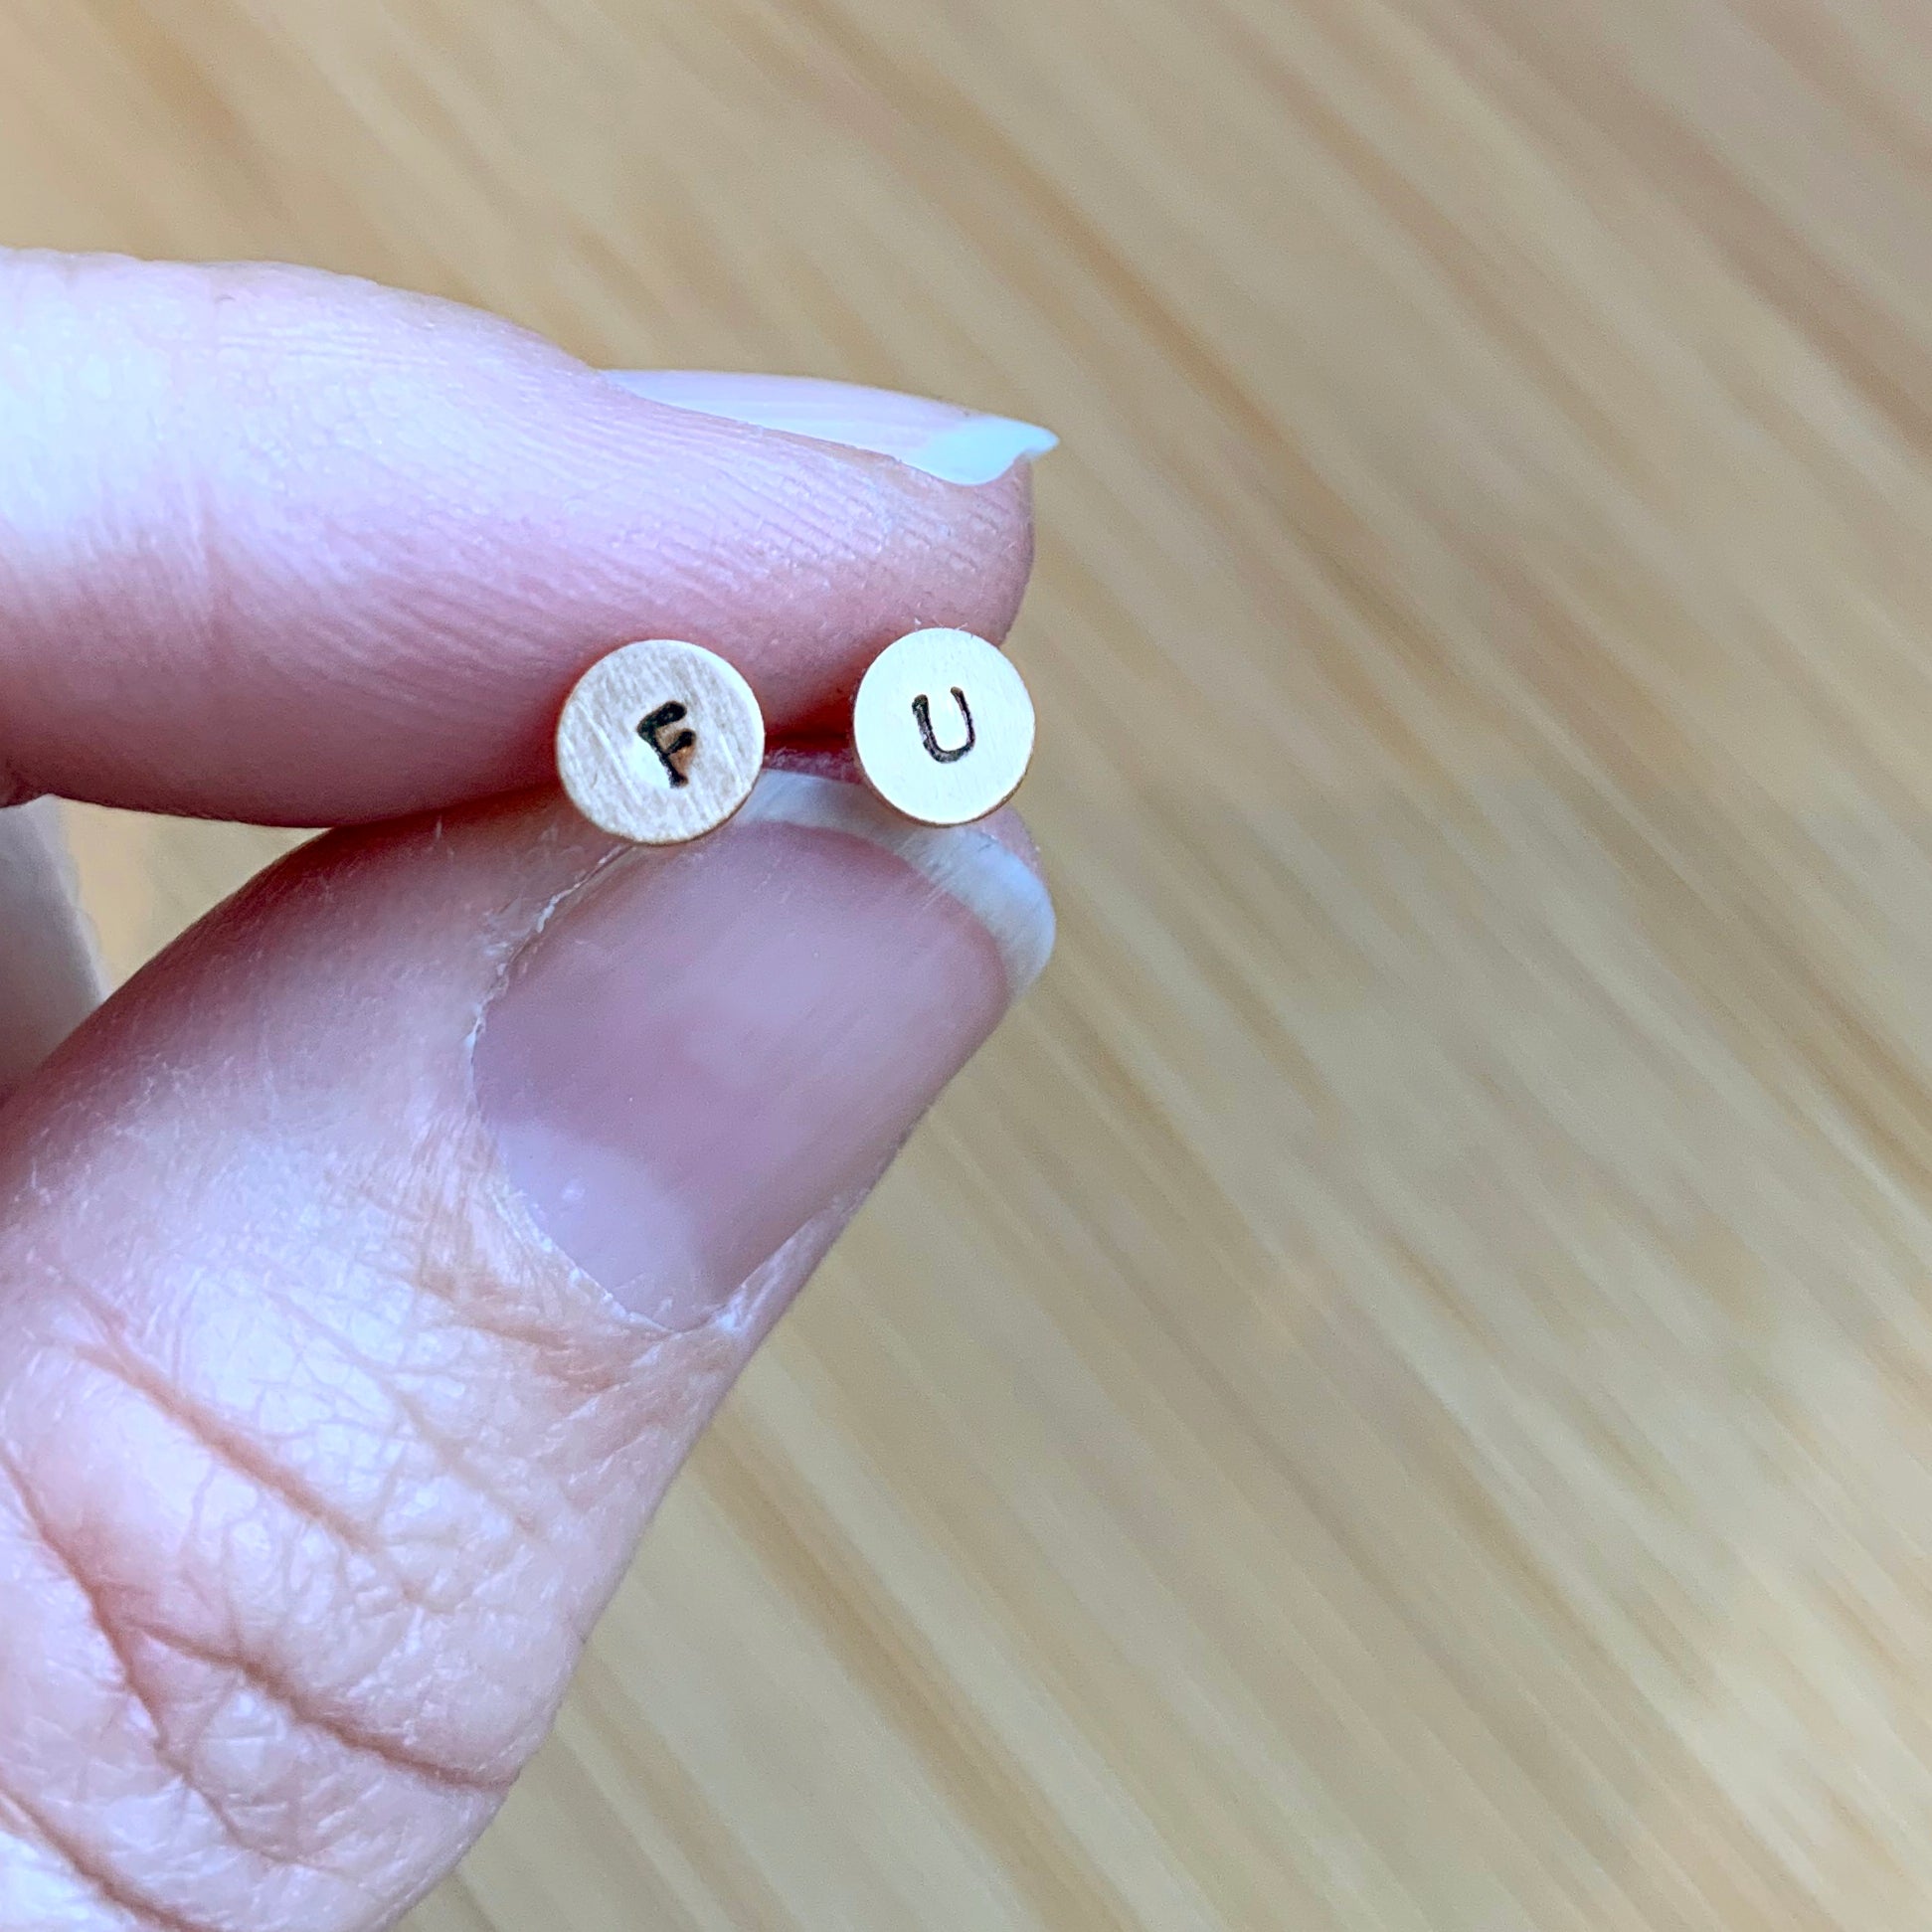 Tiny Circle Stamped Stud Earrings (Gold-Filled)